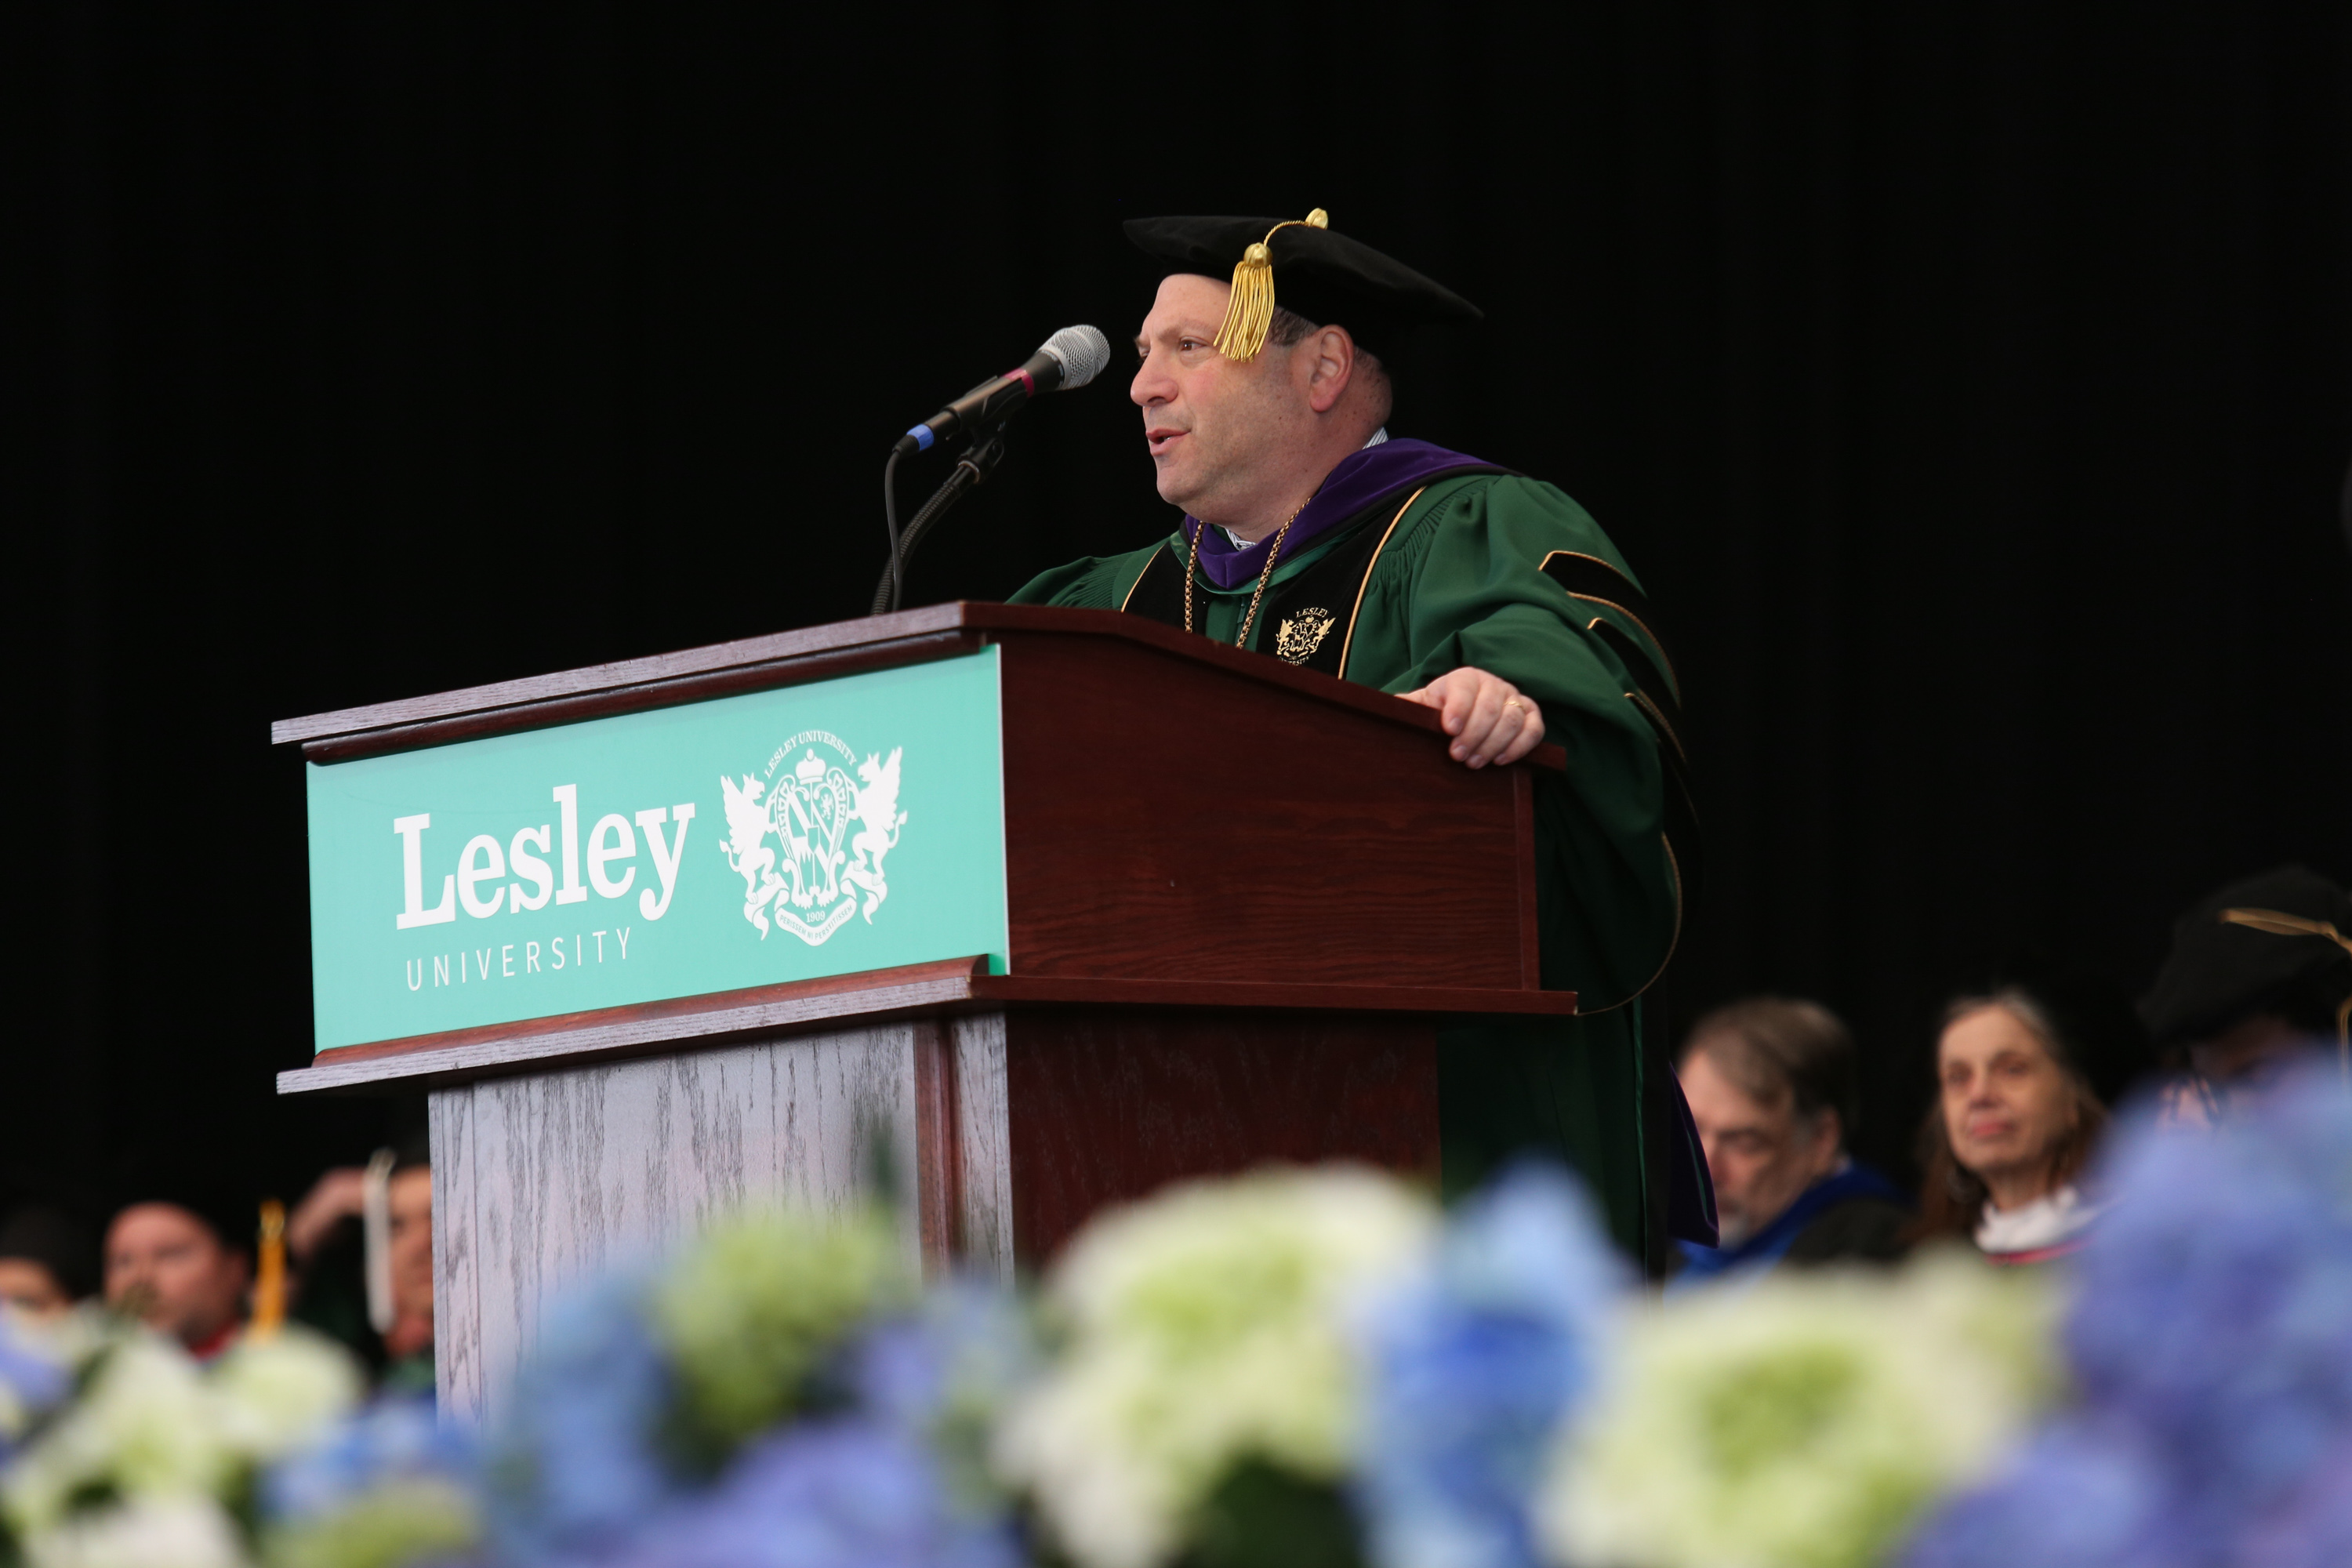 Jeff Weiss speaks at the podium at commencement 2018